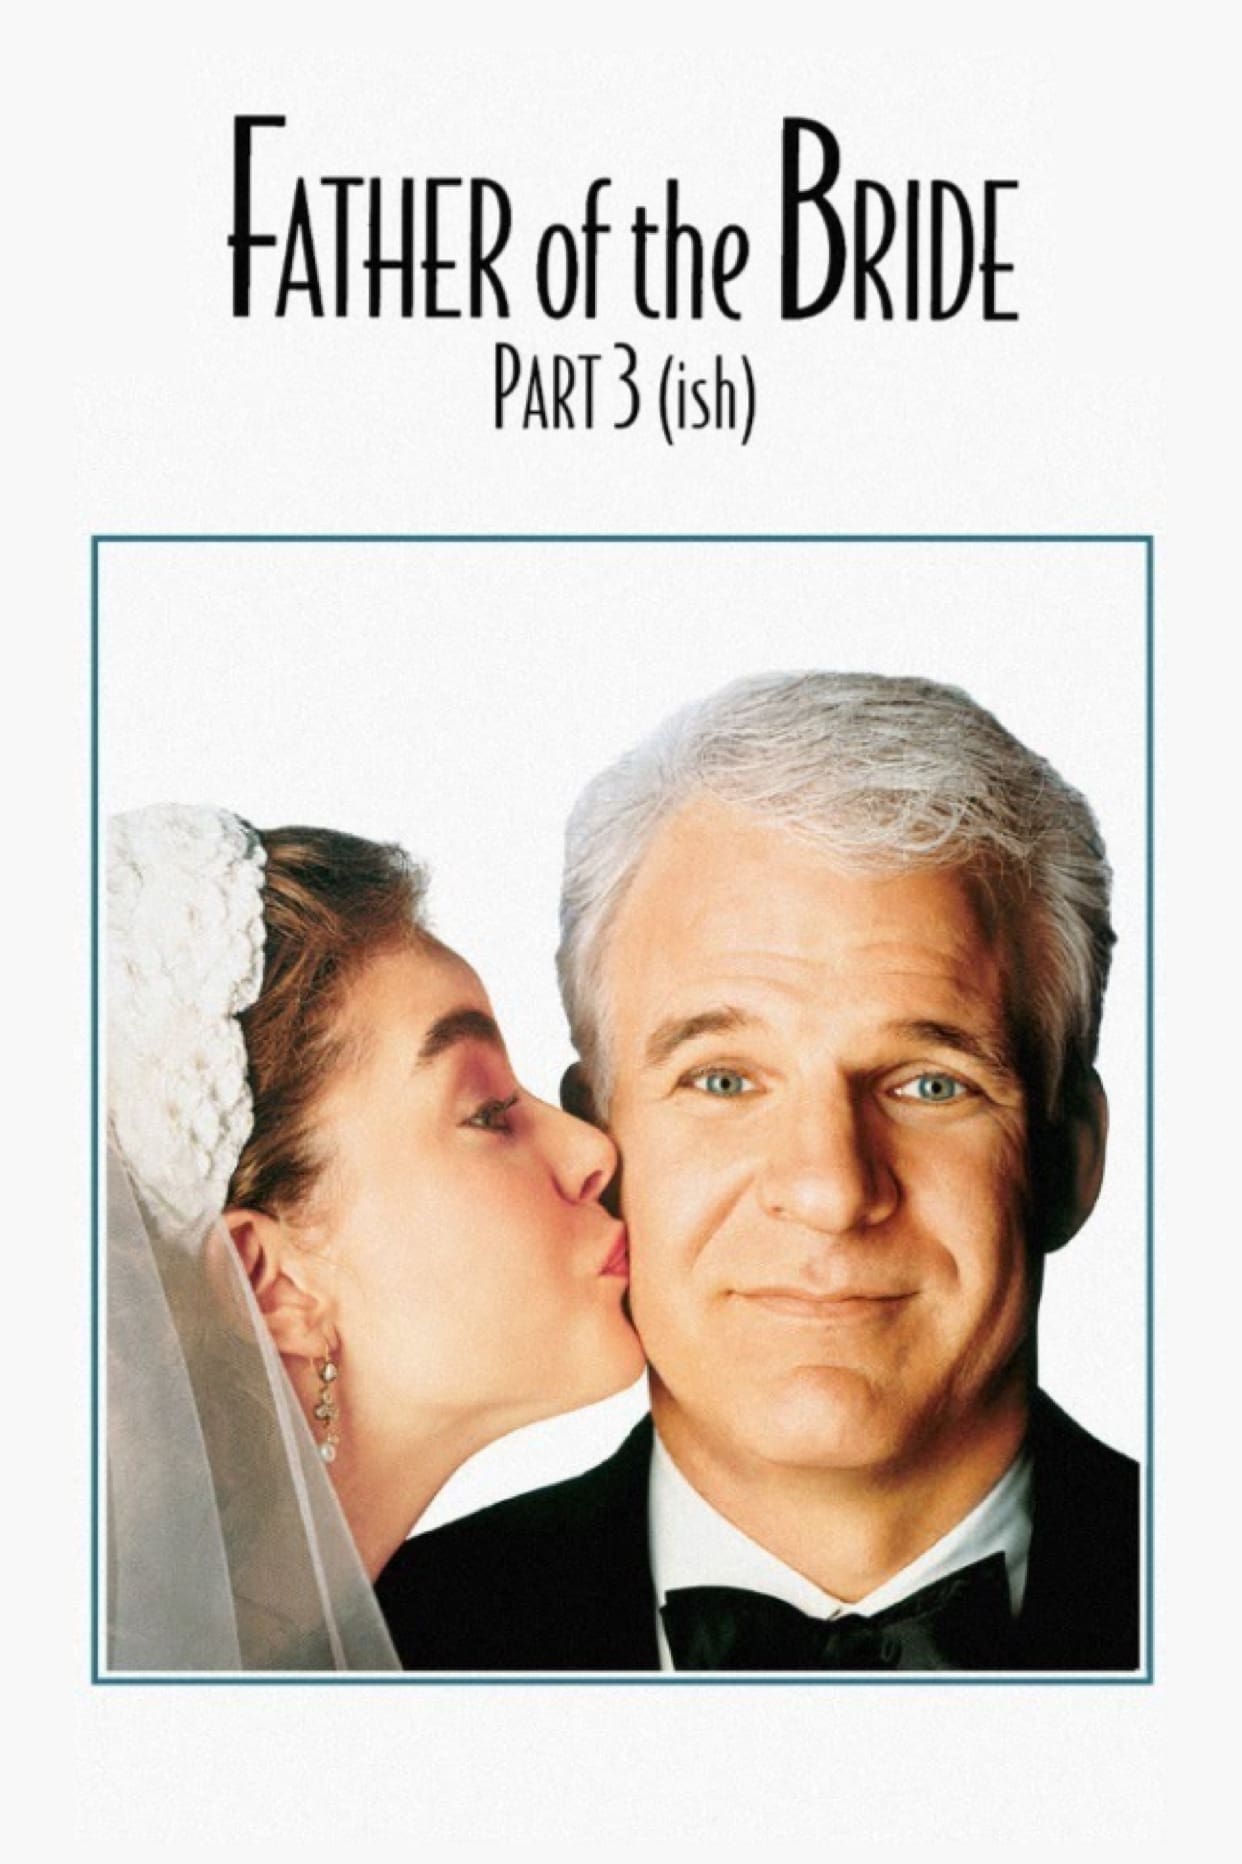 Father of the Bride Part 3 (ish) film